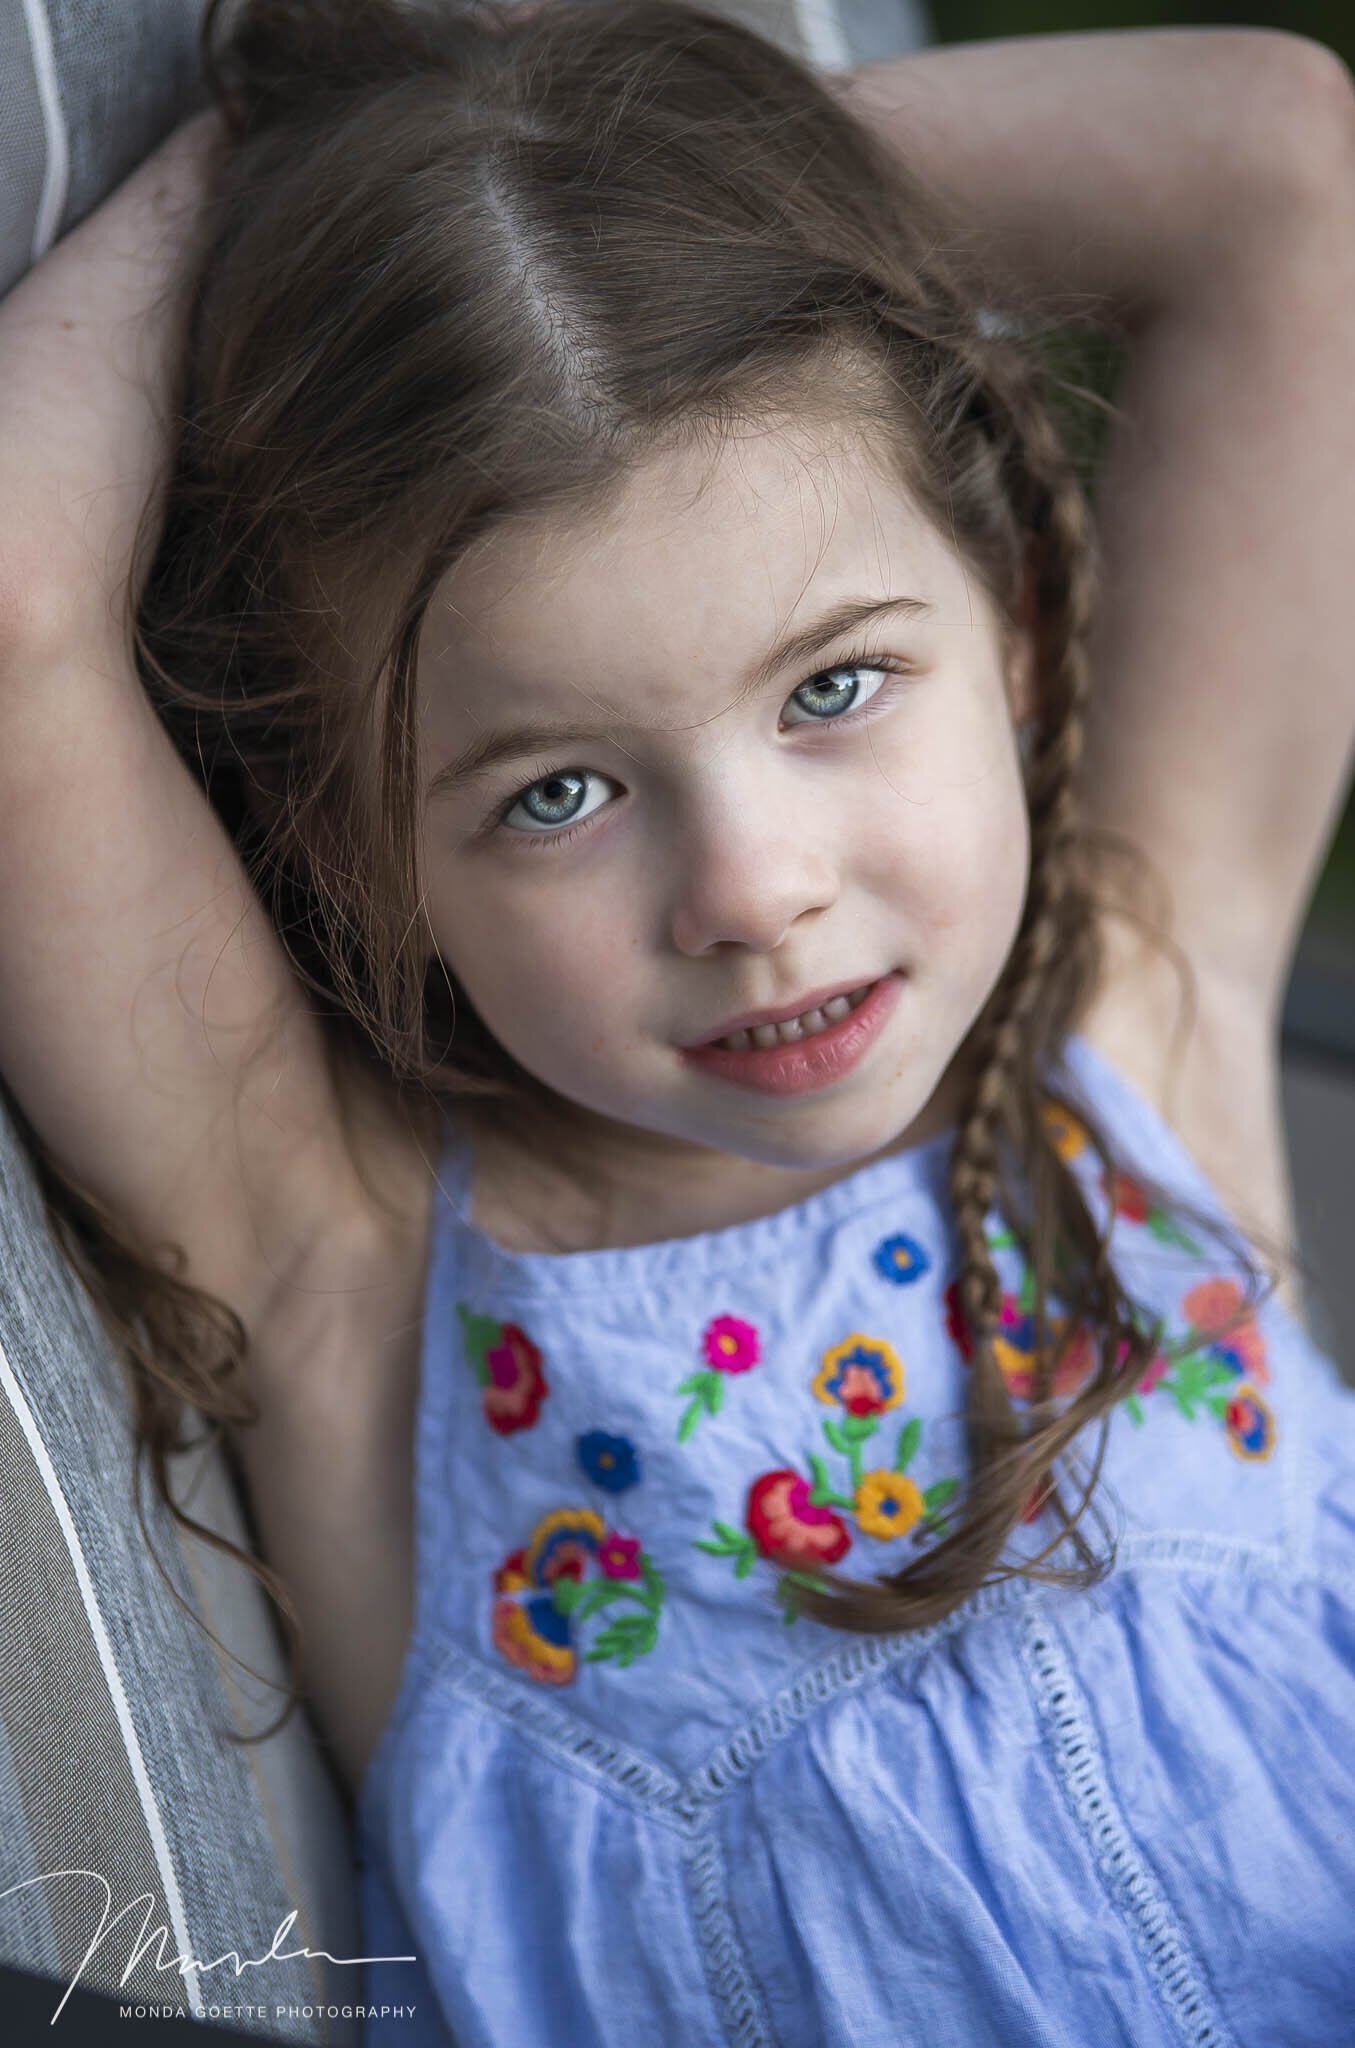 Little girl with her arms up during children's photo shoot at Monda Goette Photography.